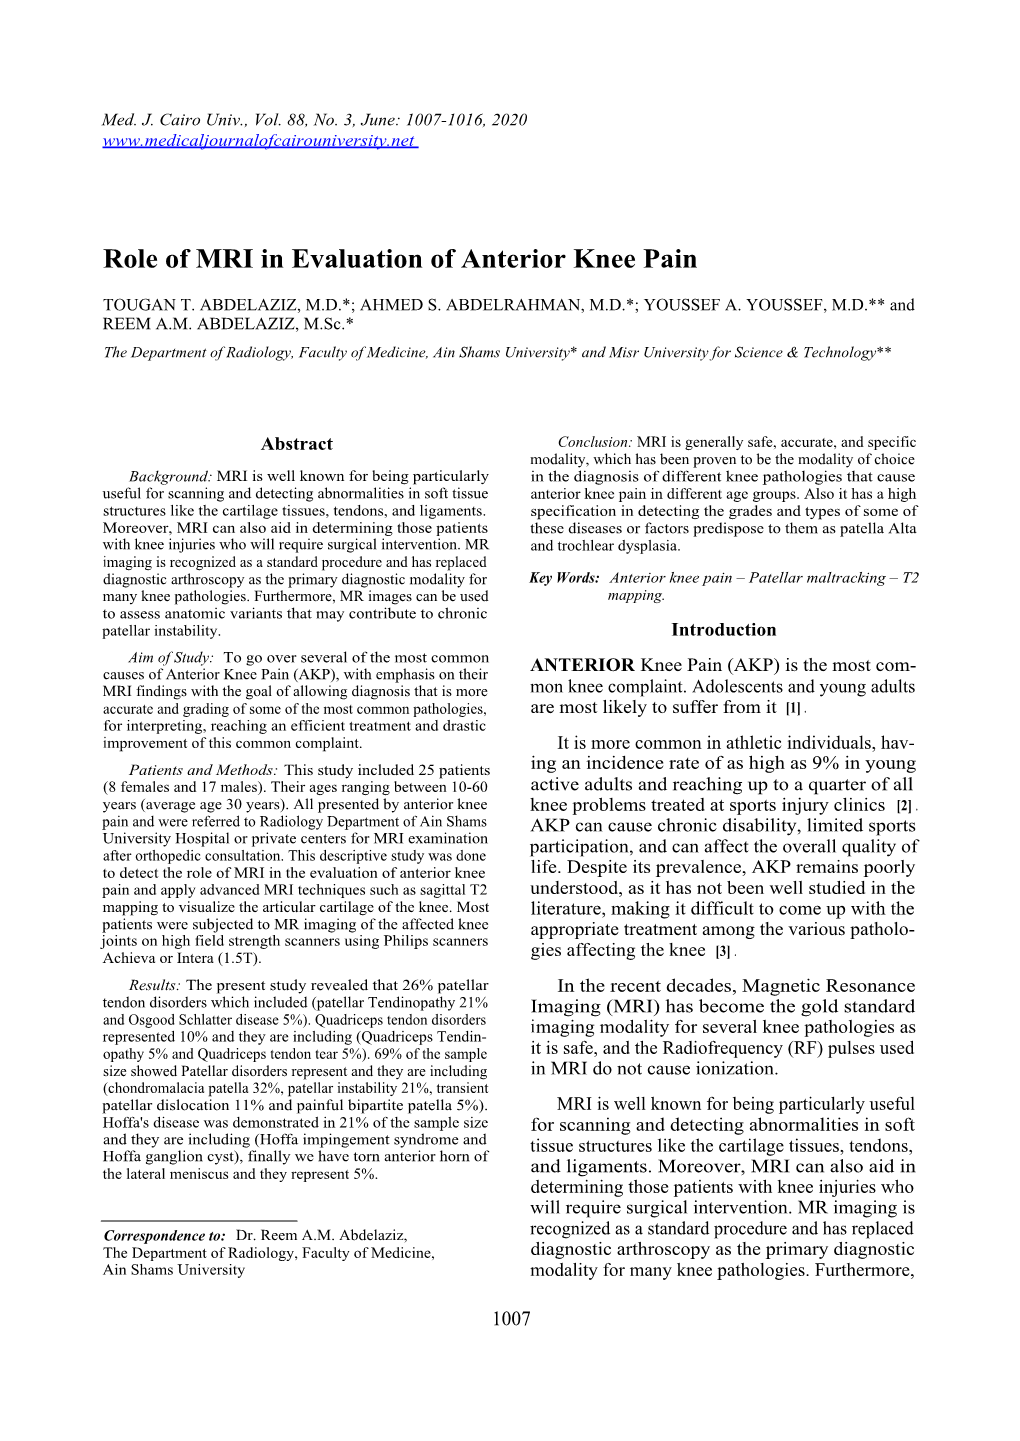 Role of MRI in Evaluation of Anterior Knee Pain